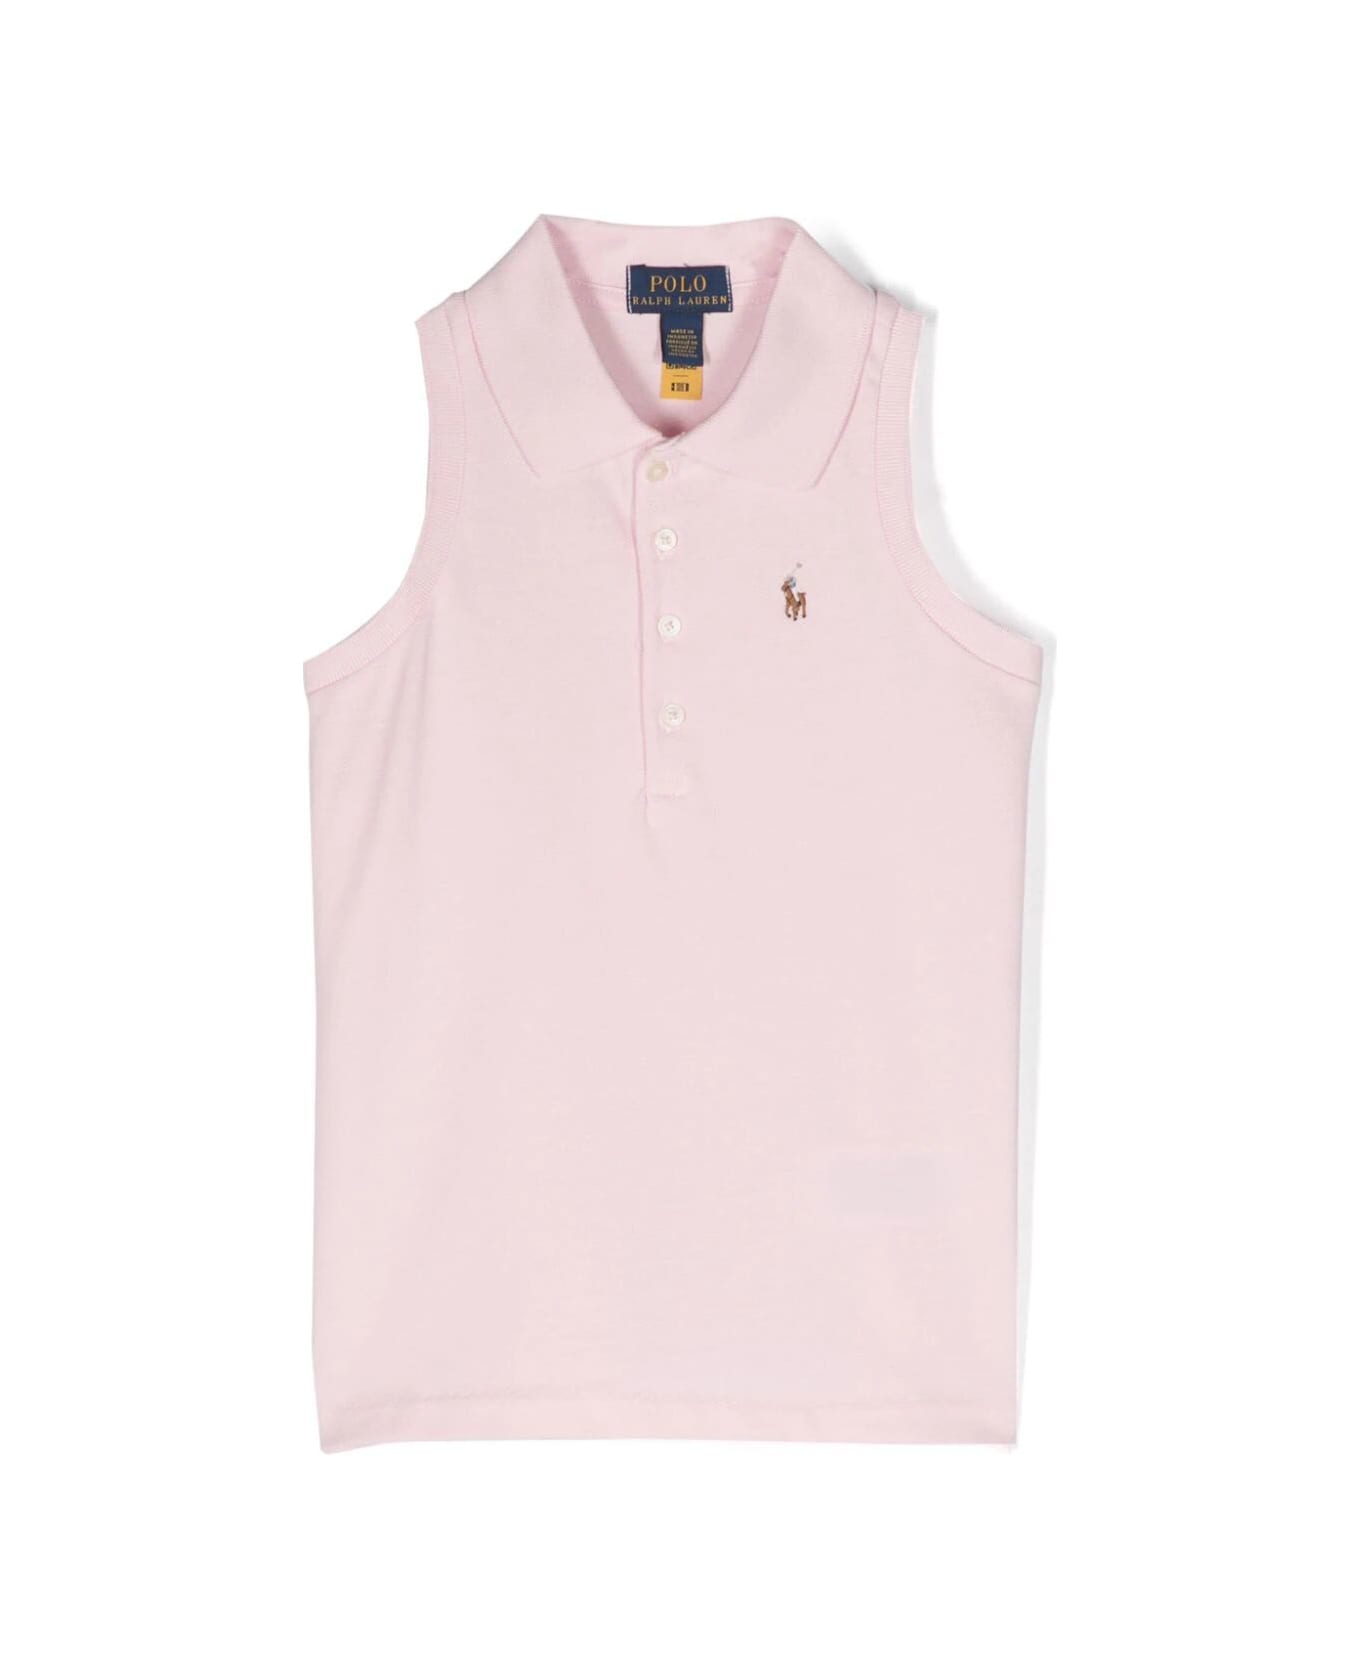 Polo Ralph Lauren Slvlesspolo Knit Shirts Polo Shirt - Hint Of Pink